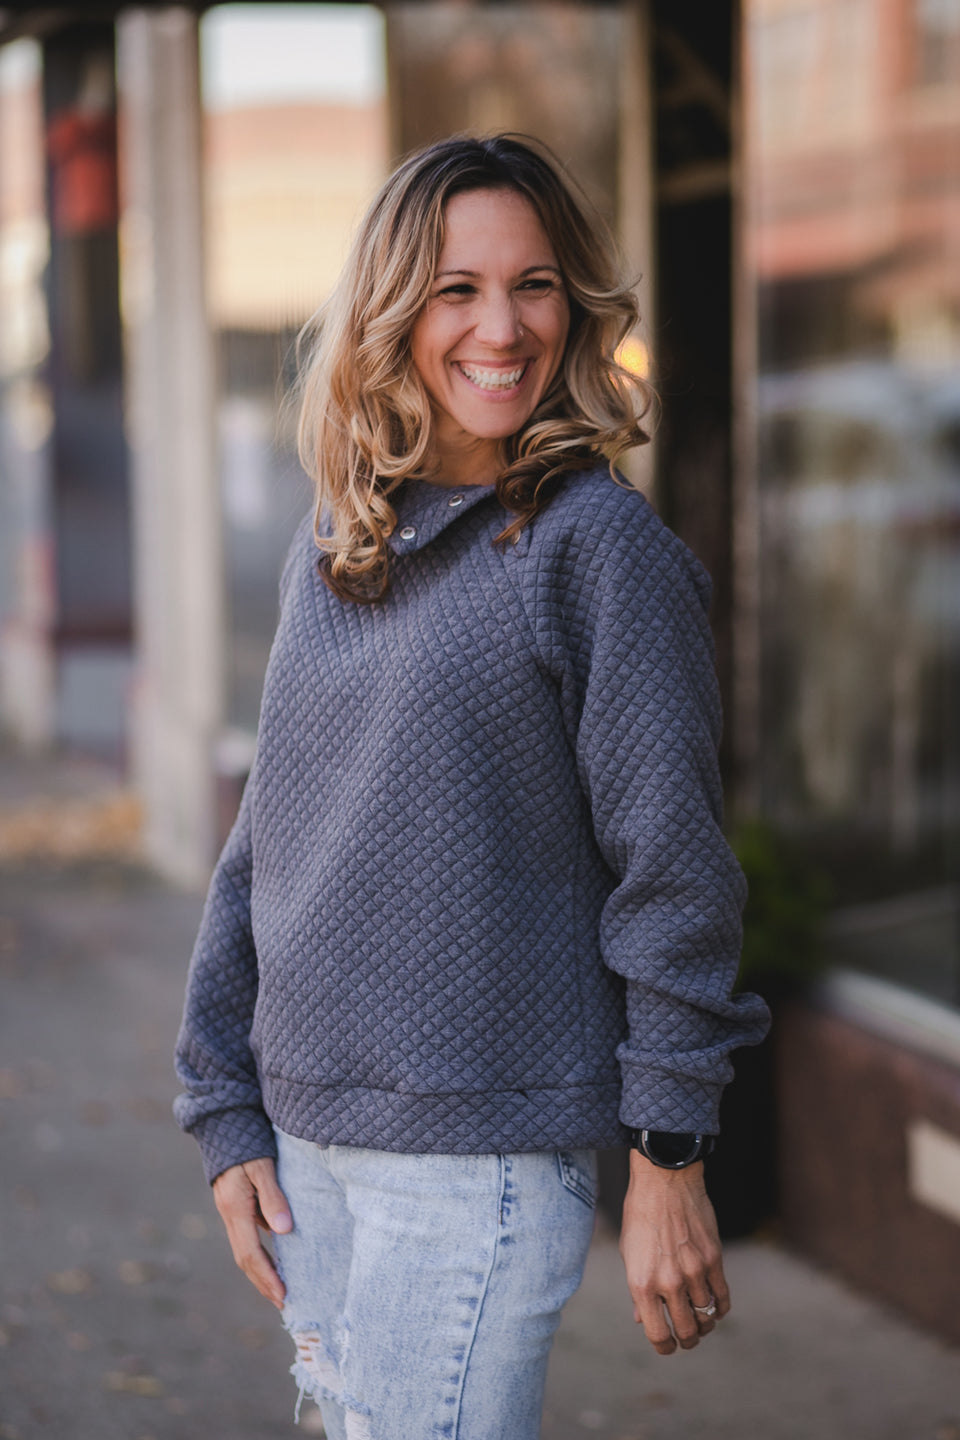 Sleigh Ride Quilted Sweatshirt - Charcoal